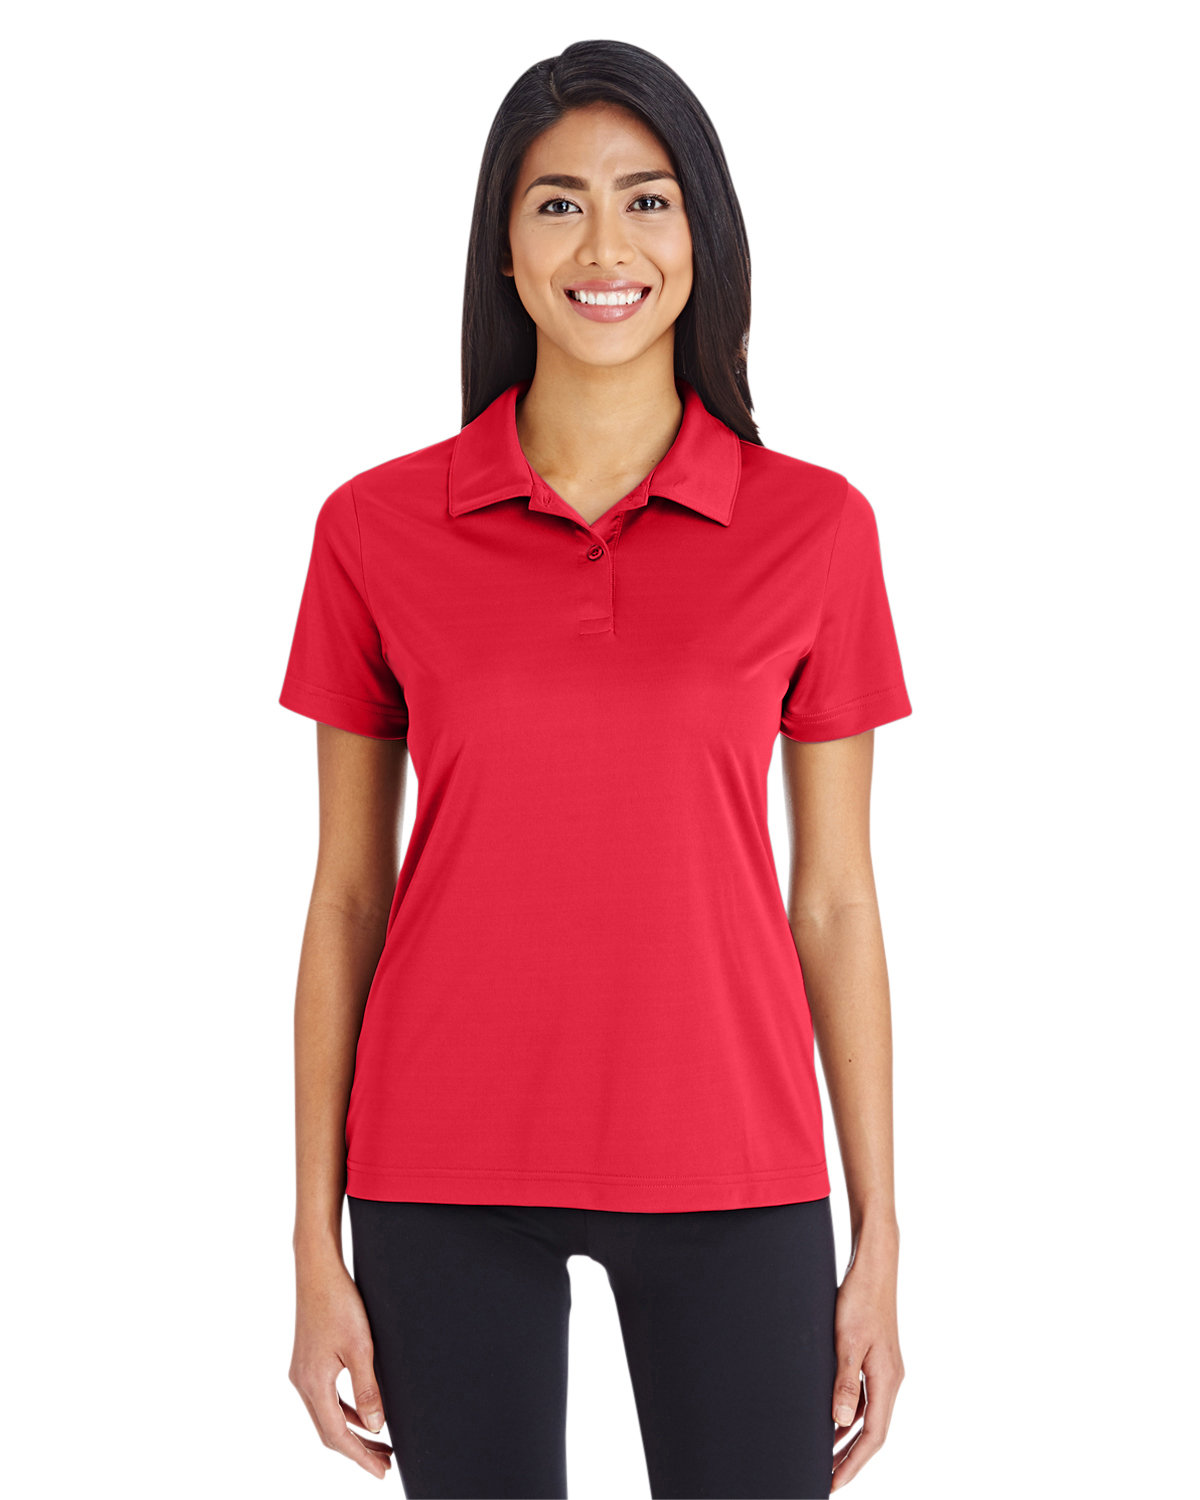 Team 365 Ladies' Zone Performance Polo SPORT RED 